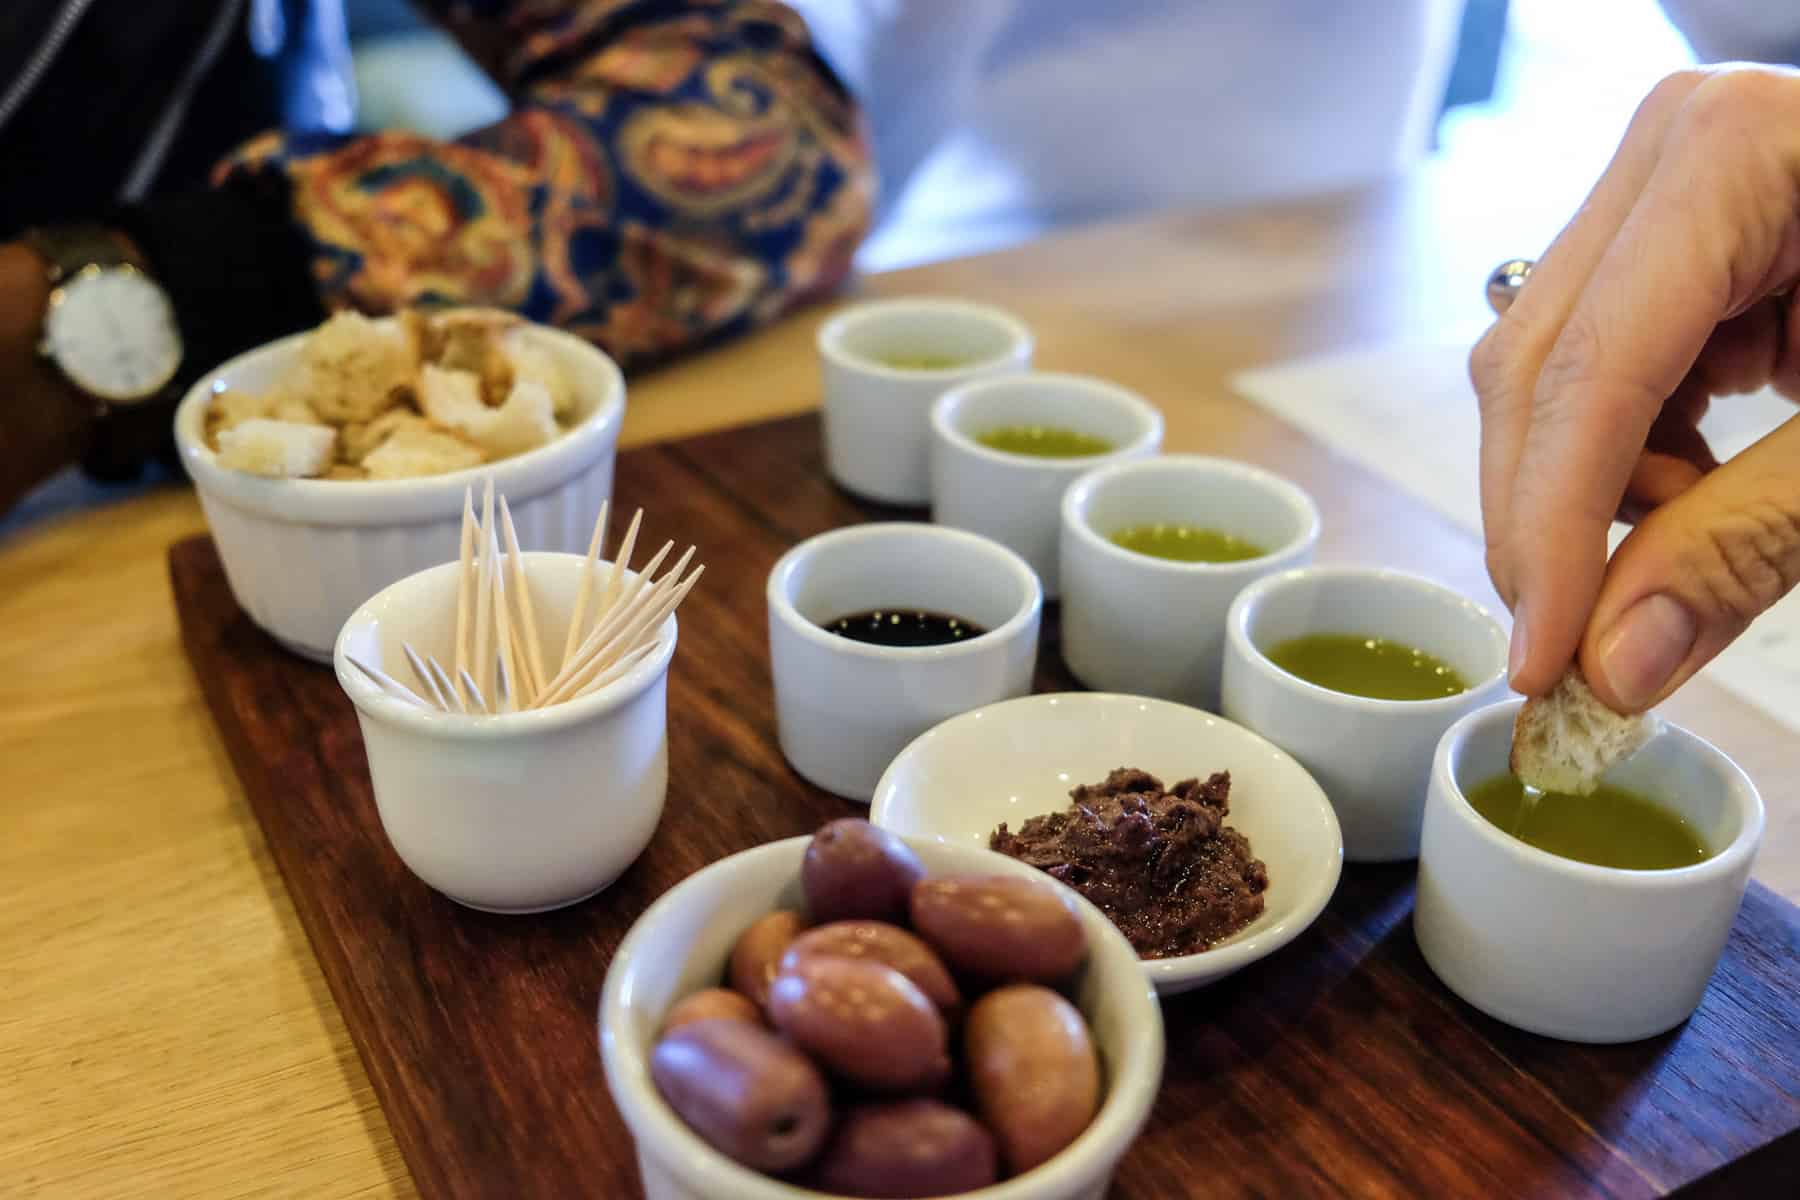 A hand dips a tiny piece of bread into one of five small white pots containing olive oil for tasting. Also on the dark wooden plate are bowls of olives and toothpicks